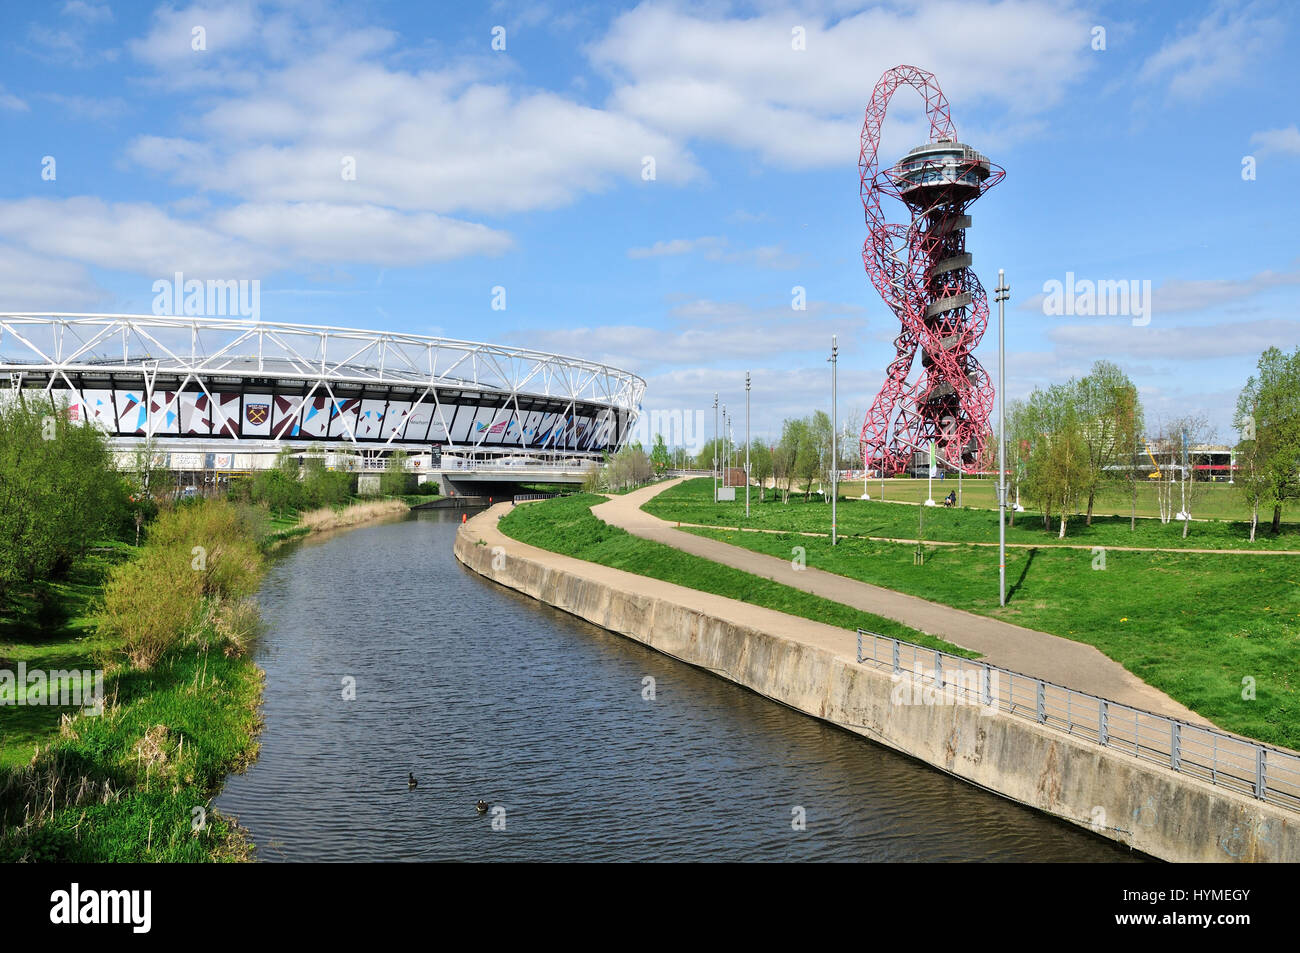 The London Stadium and City Mill River in the Queen Elizabeth Olympic Park at Stratford, East London UK Stock Photo